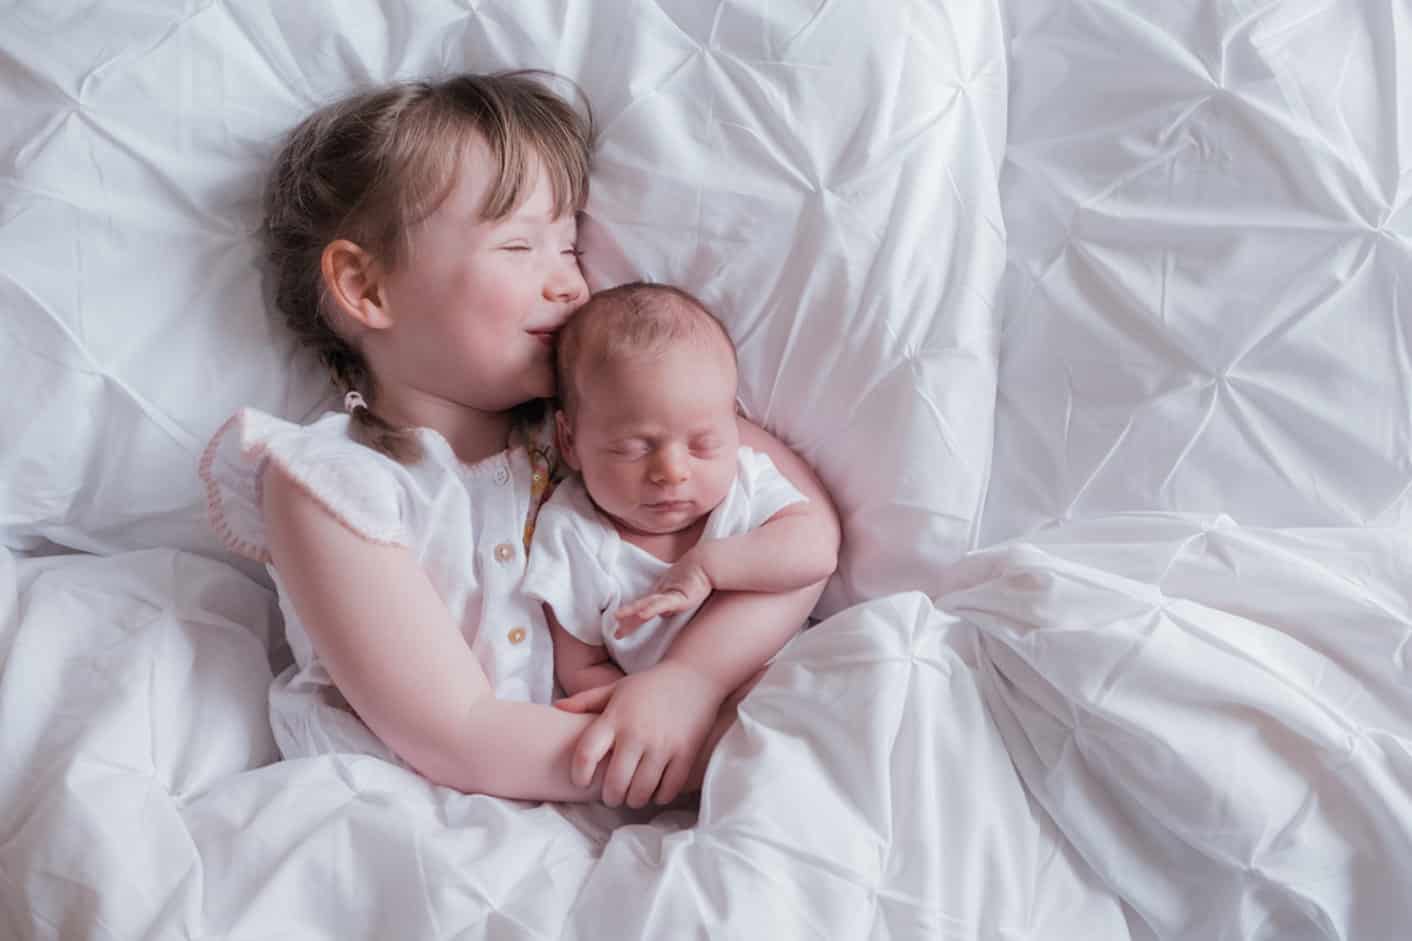 photographer takes newborn baby photoshoot at home with siblings in the bed